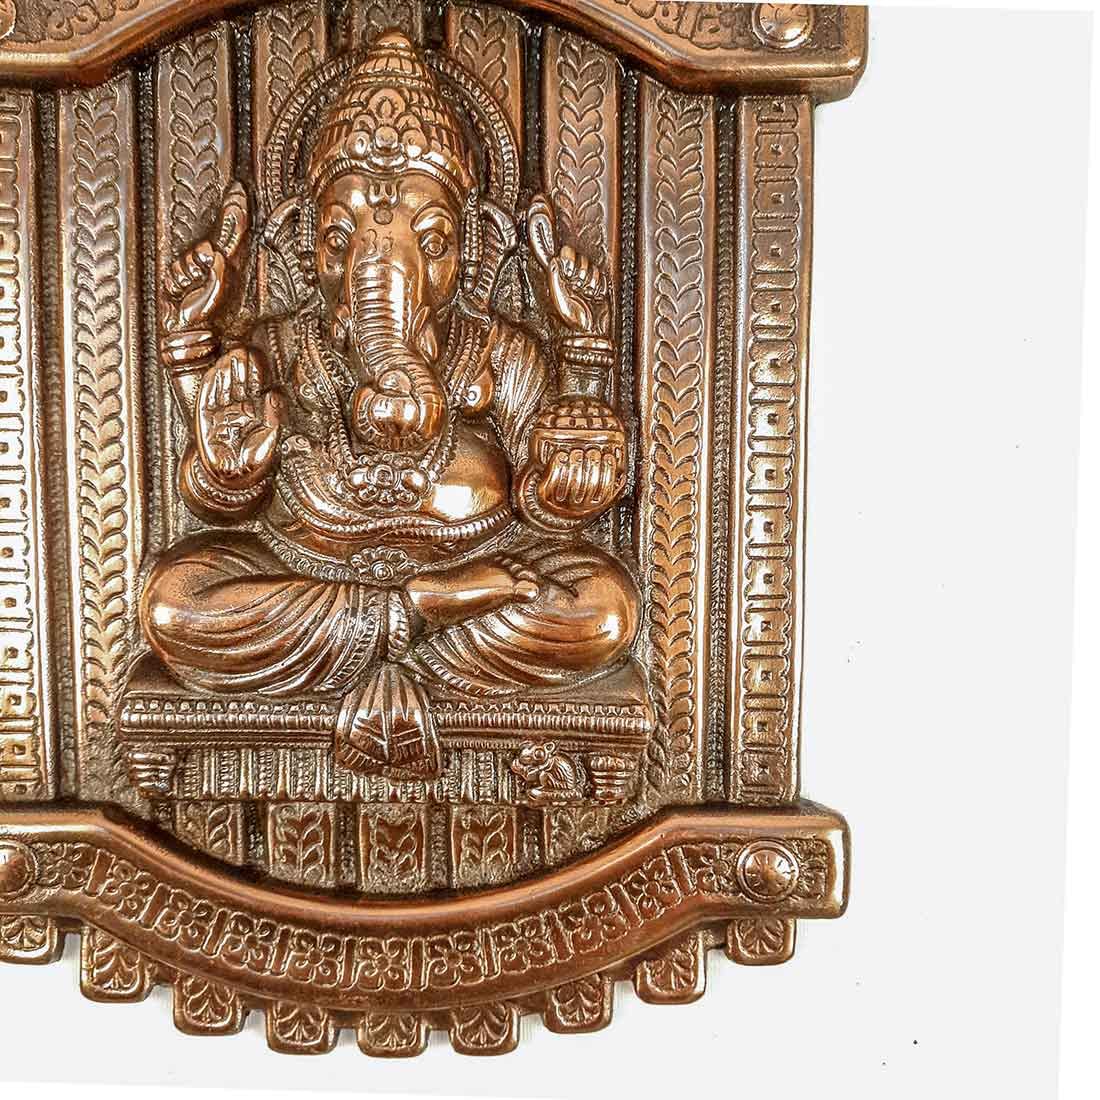 Hand Crafted Lord Ganesh Wall Hanging / Wall Decor, Room Decor, Home Decor and Gifts (13 x 9 Inches; 640g) Mangal Fashions | Indian Home Decor and Craft